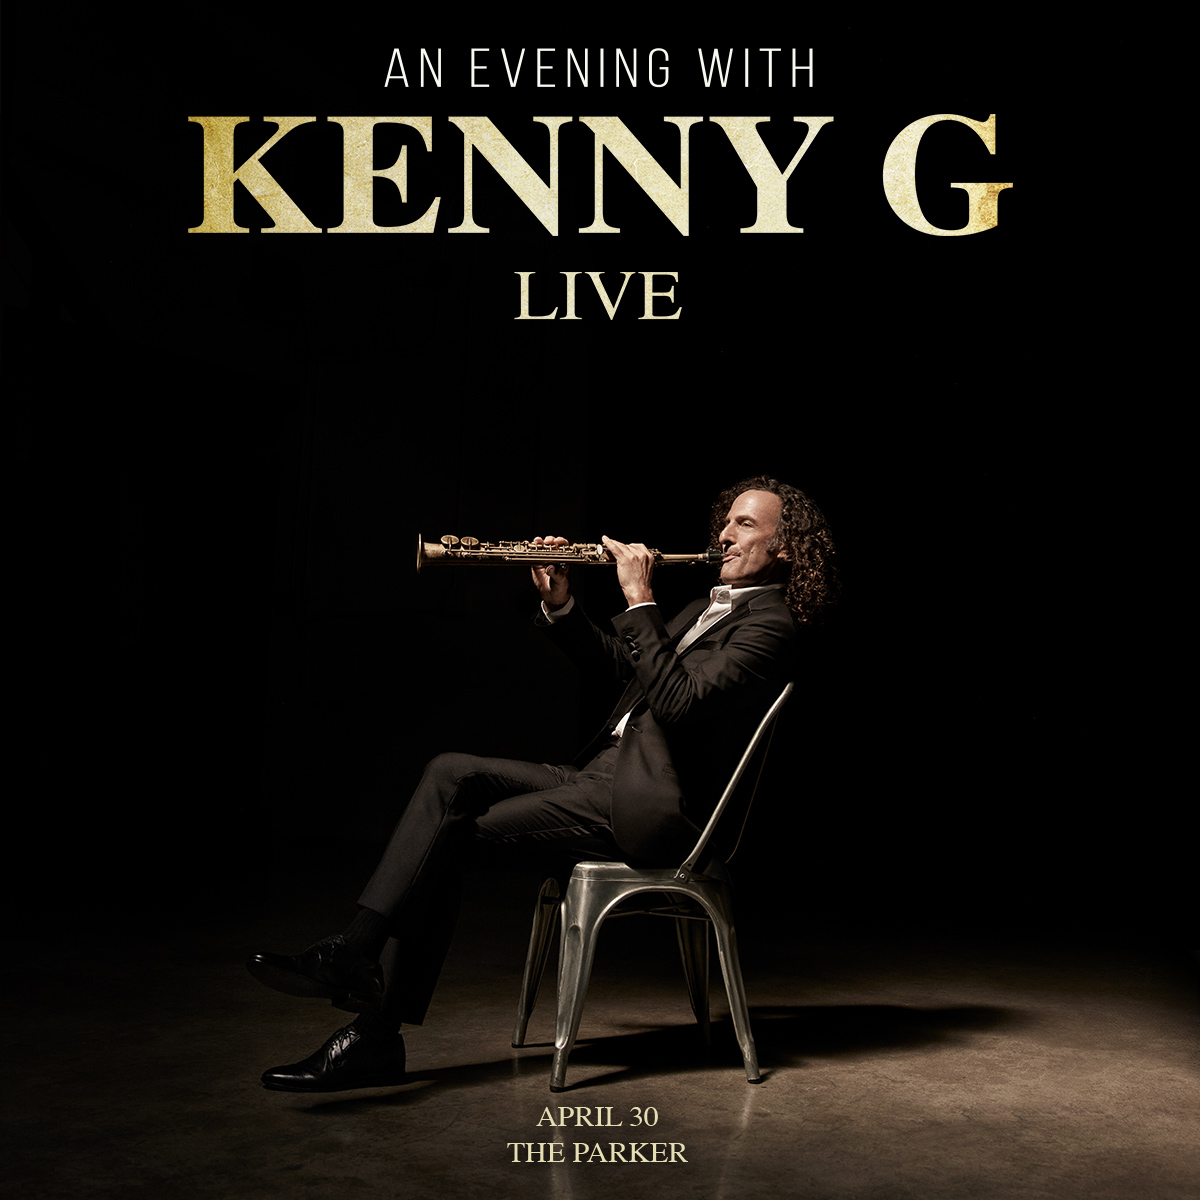 Kenny G playing the saxophone at The Parker for a live performance on April 30, hosted by the TD Bank Jazz Series.